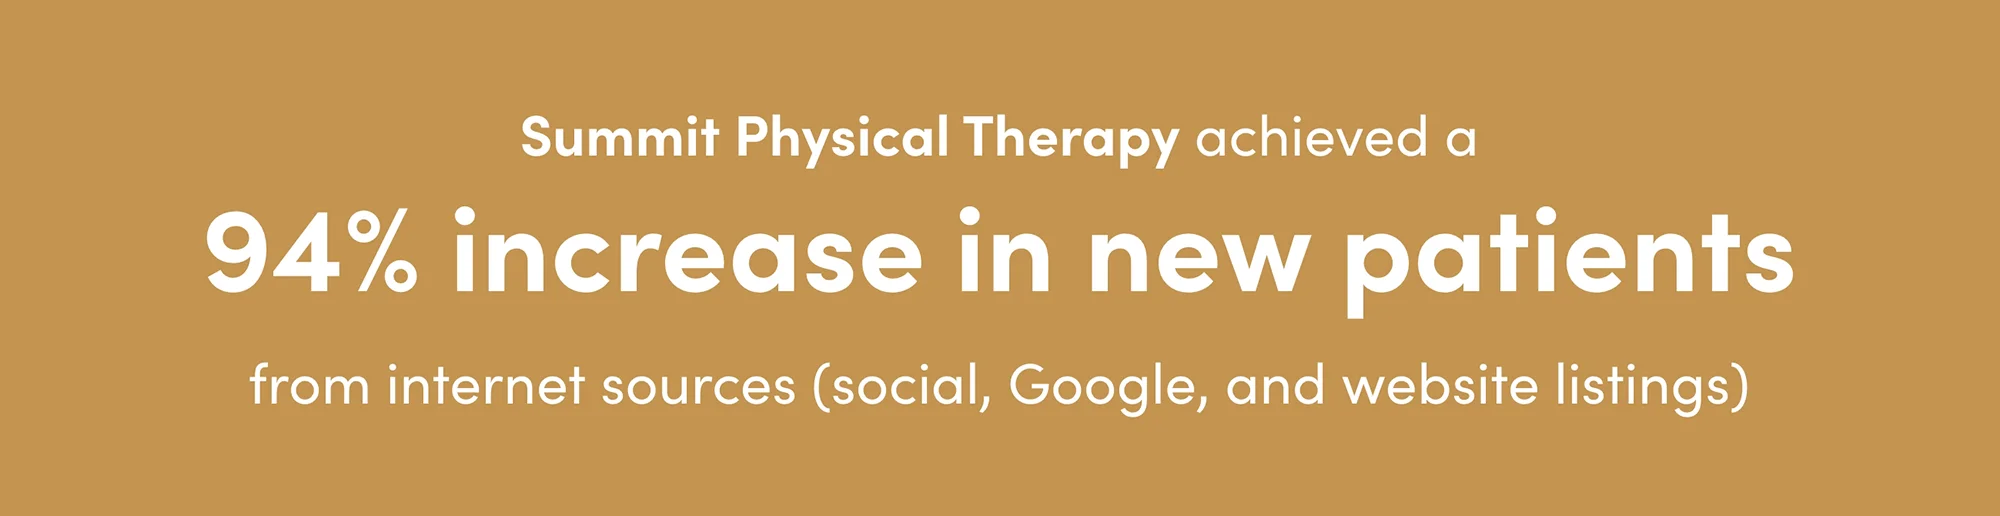 Summit Physical Therapy achieved a 94% increase in new patients from internet sources (social, Google, and website listings)